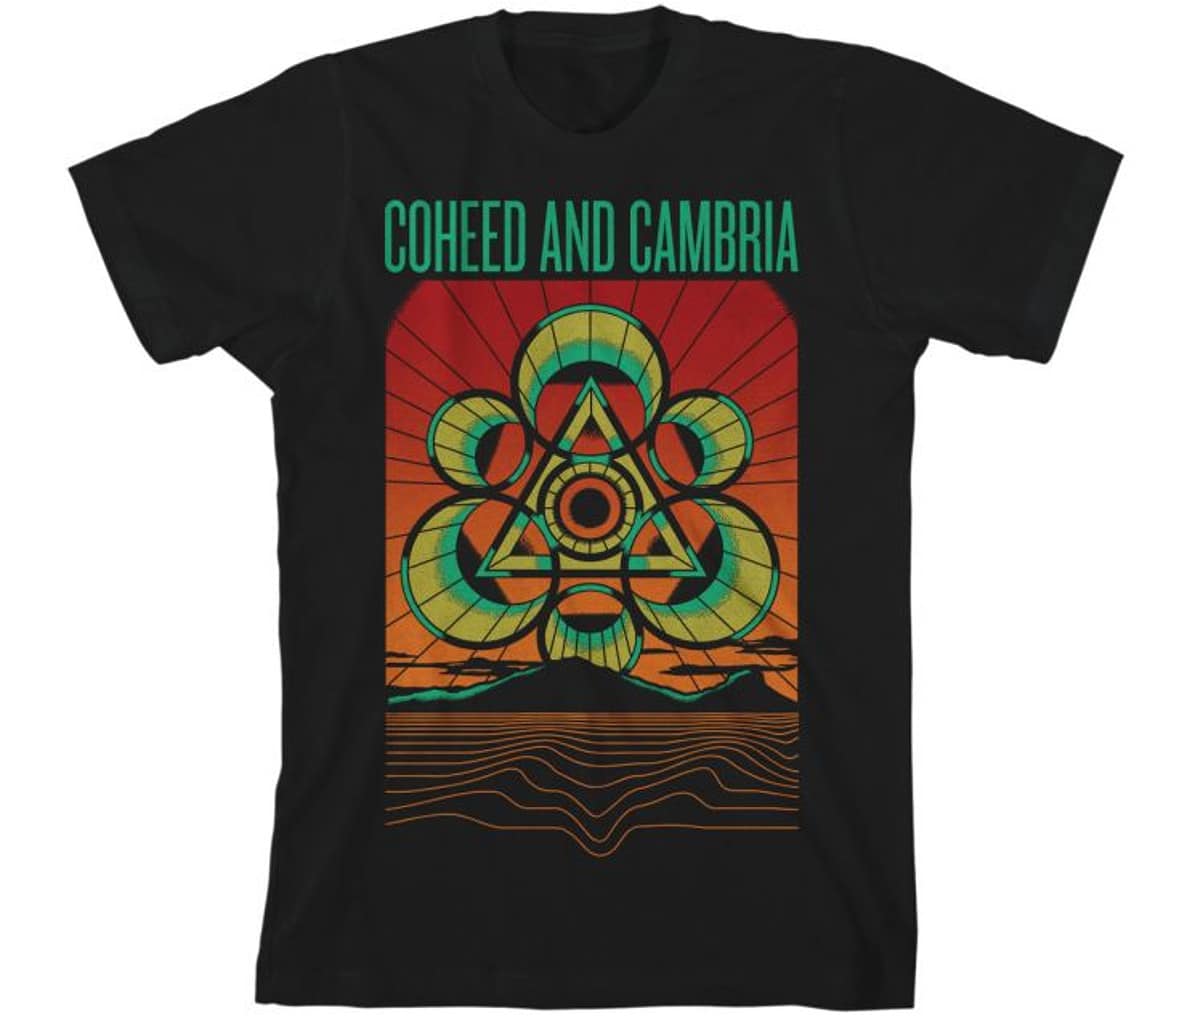 K-deio Man Big Size T Shirt Coheed and Cambria T Shirts Cool Oversize Tshirts Larger Waist Size